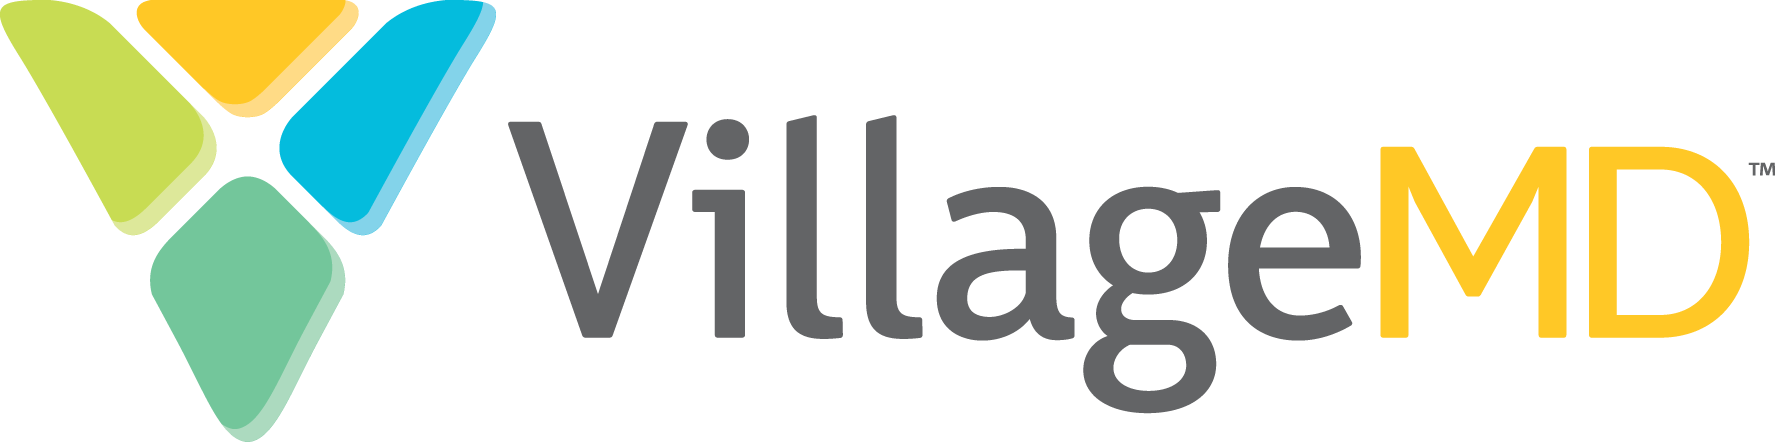 VillageMD Teams up With CAPABLE